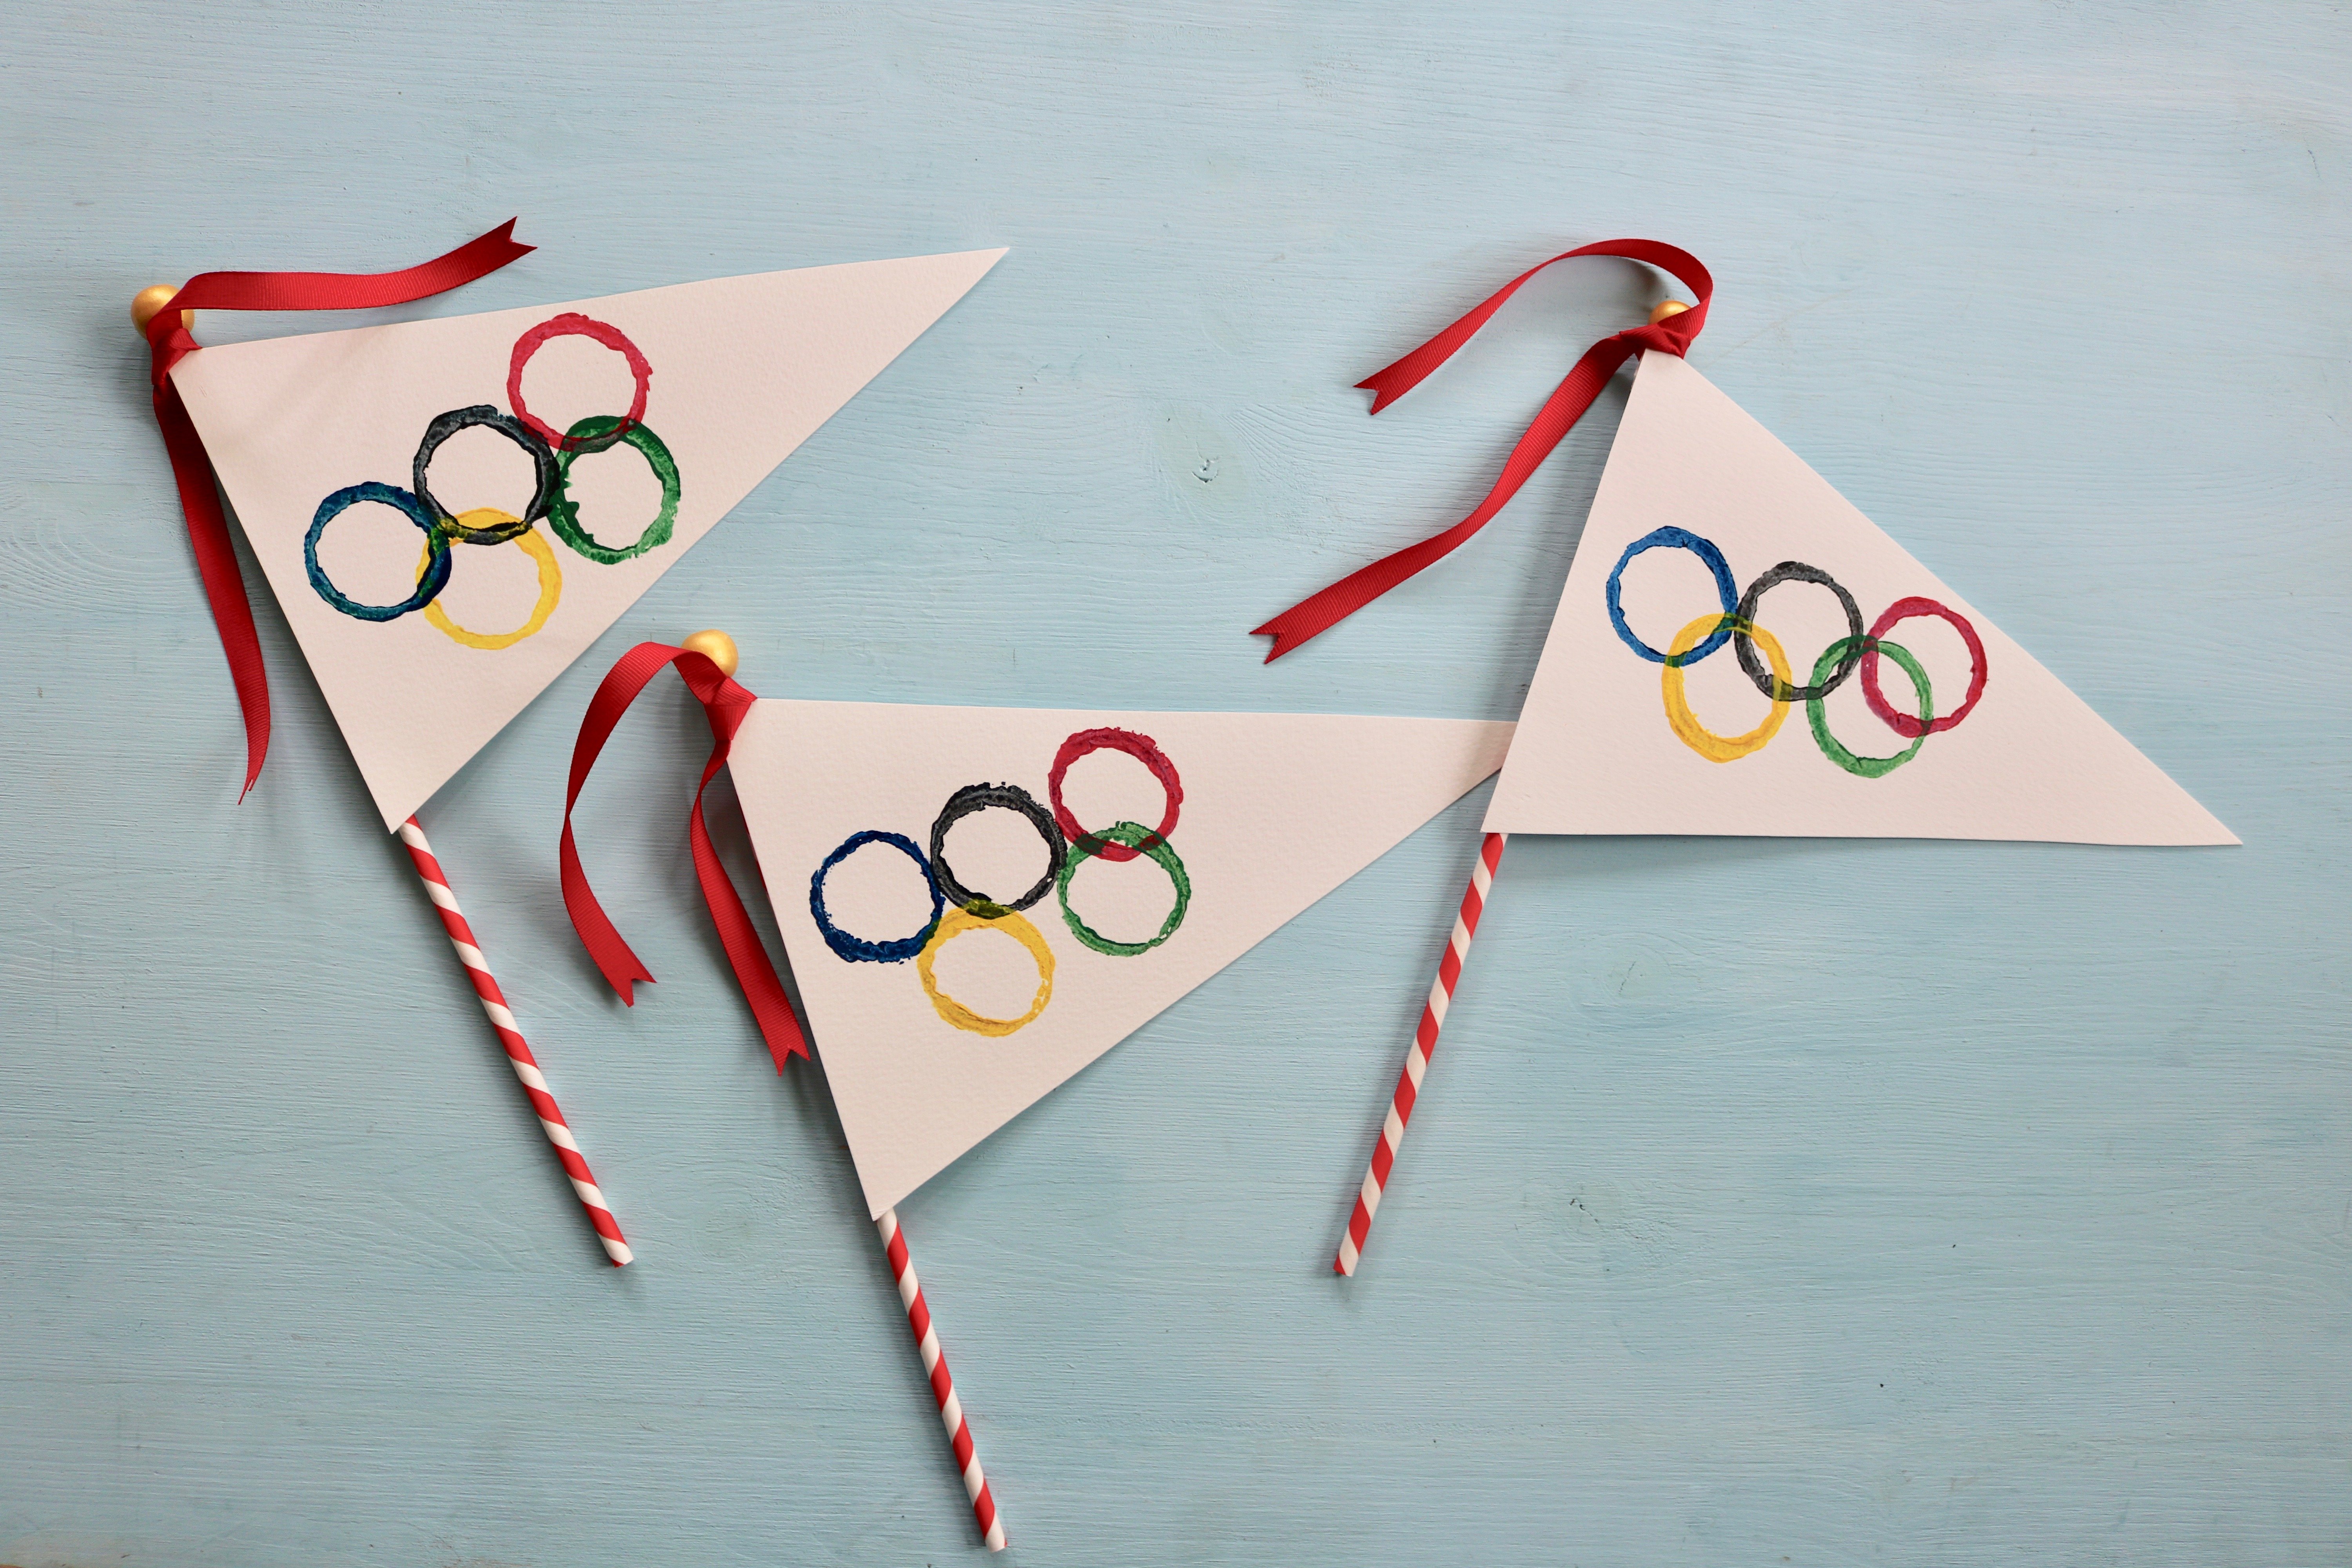 Three handmade flags with Olympic logos on them.